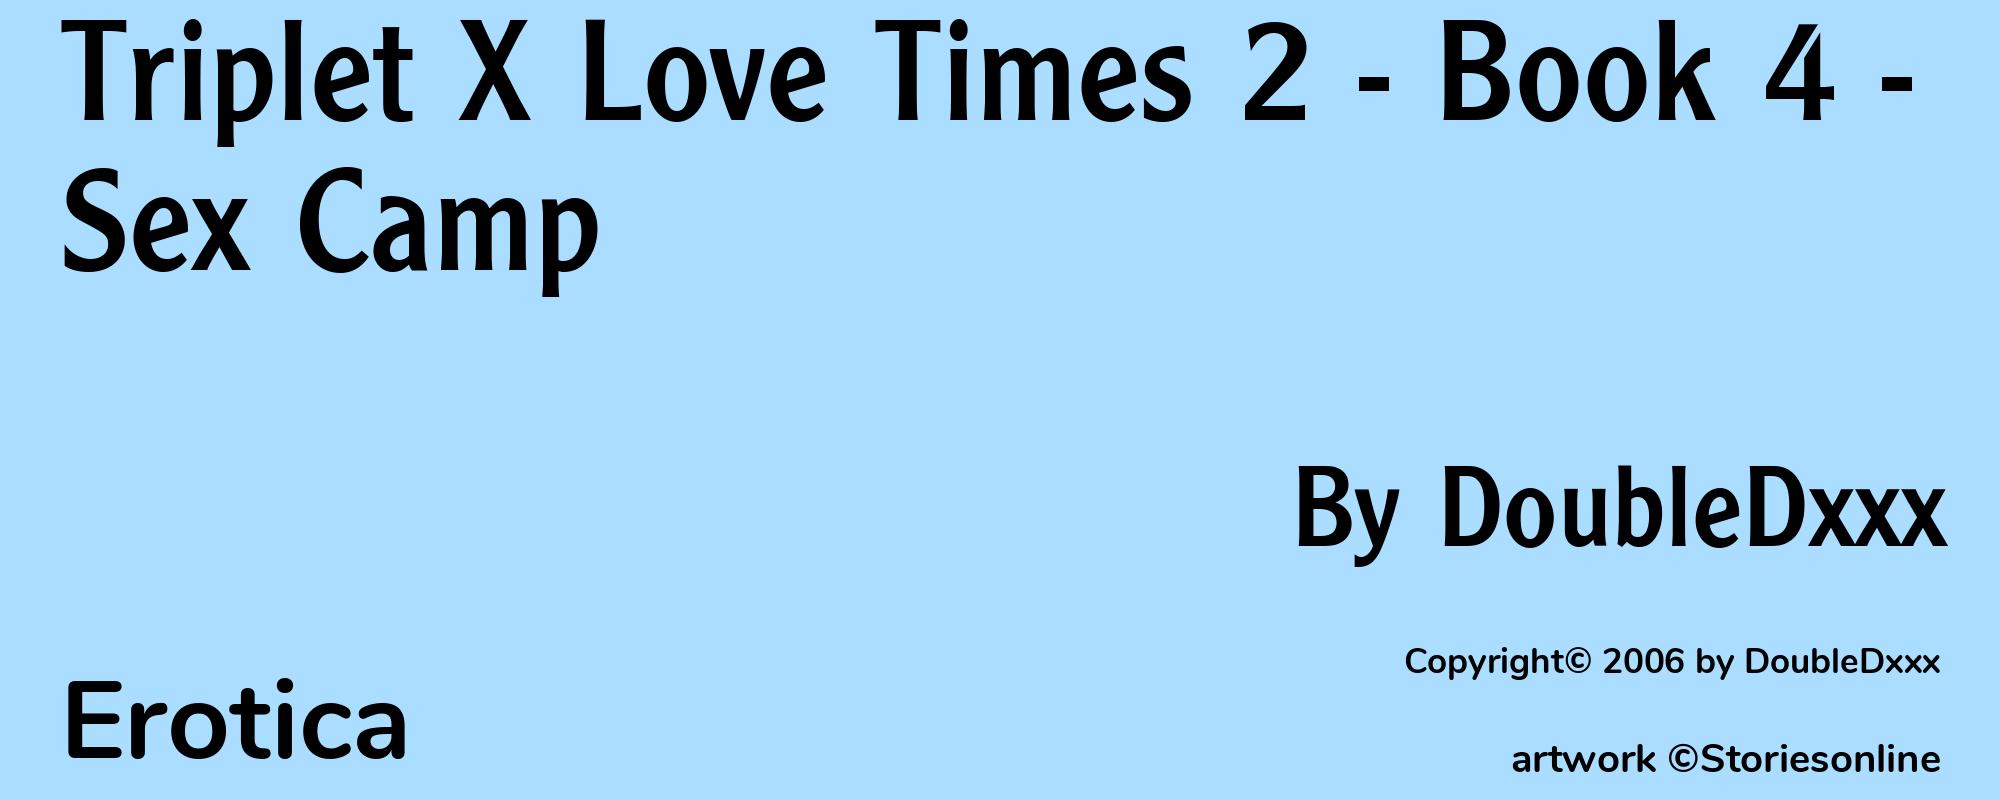 Triplet X Love Times 2 - Book 4 - Sex Camp - Cover